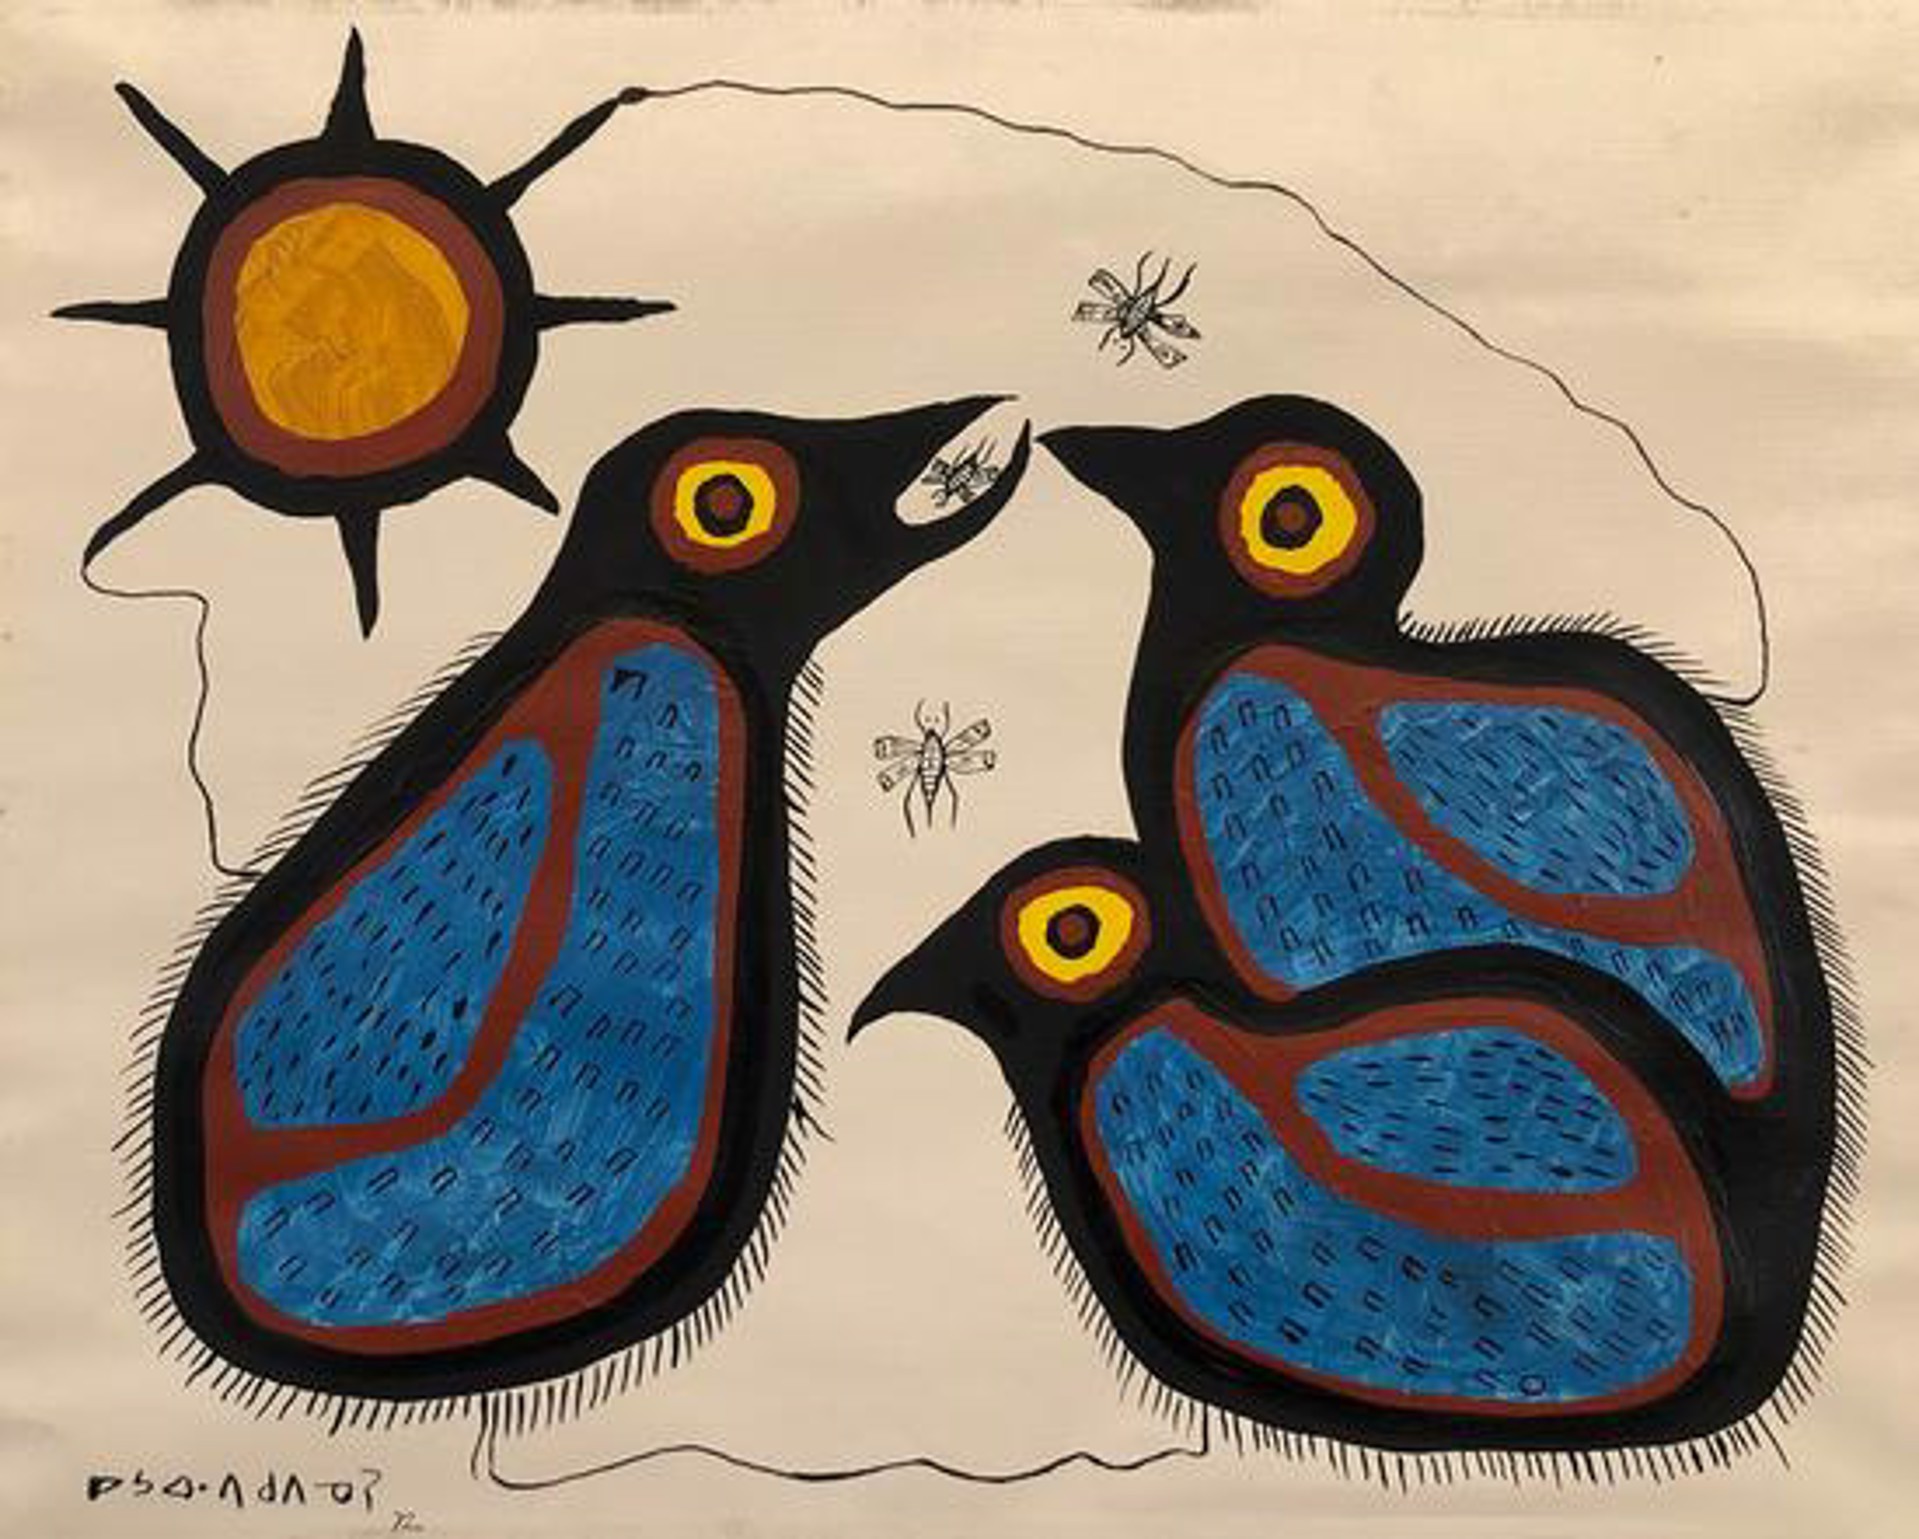 Untitled (1972) by Norval Morrisseau (1931-2007)